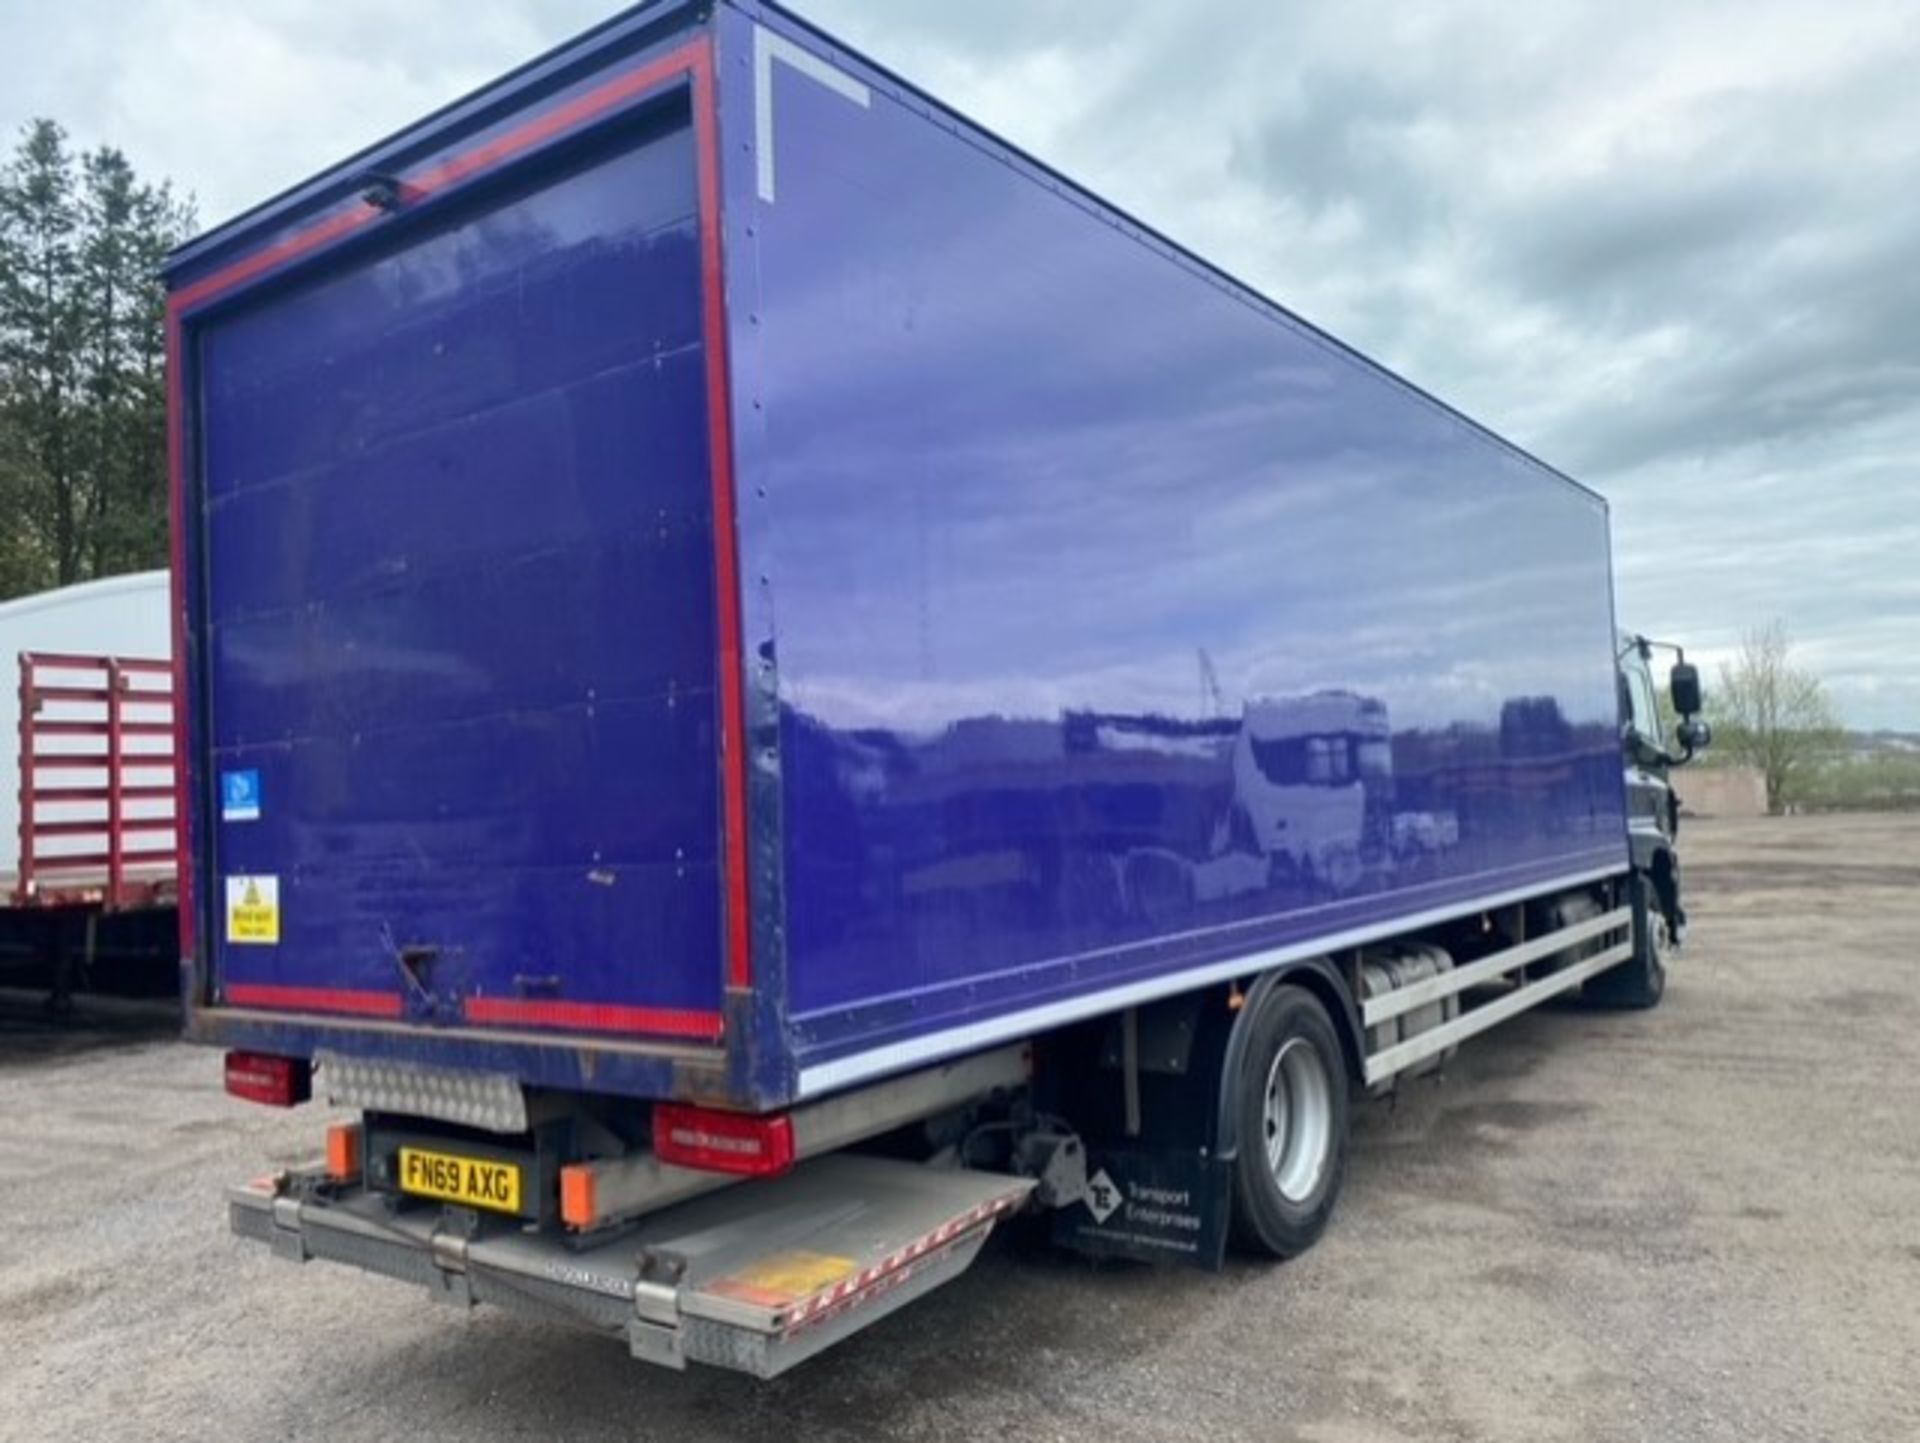 2019, DAF CF 260 FA (Ex-Fleet Owned & Maintained) - FN69 AXG (18 Ton Rigid Truck with Tail Lift) - Image 10 of 16